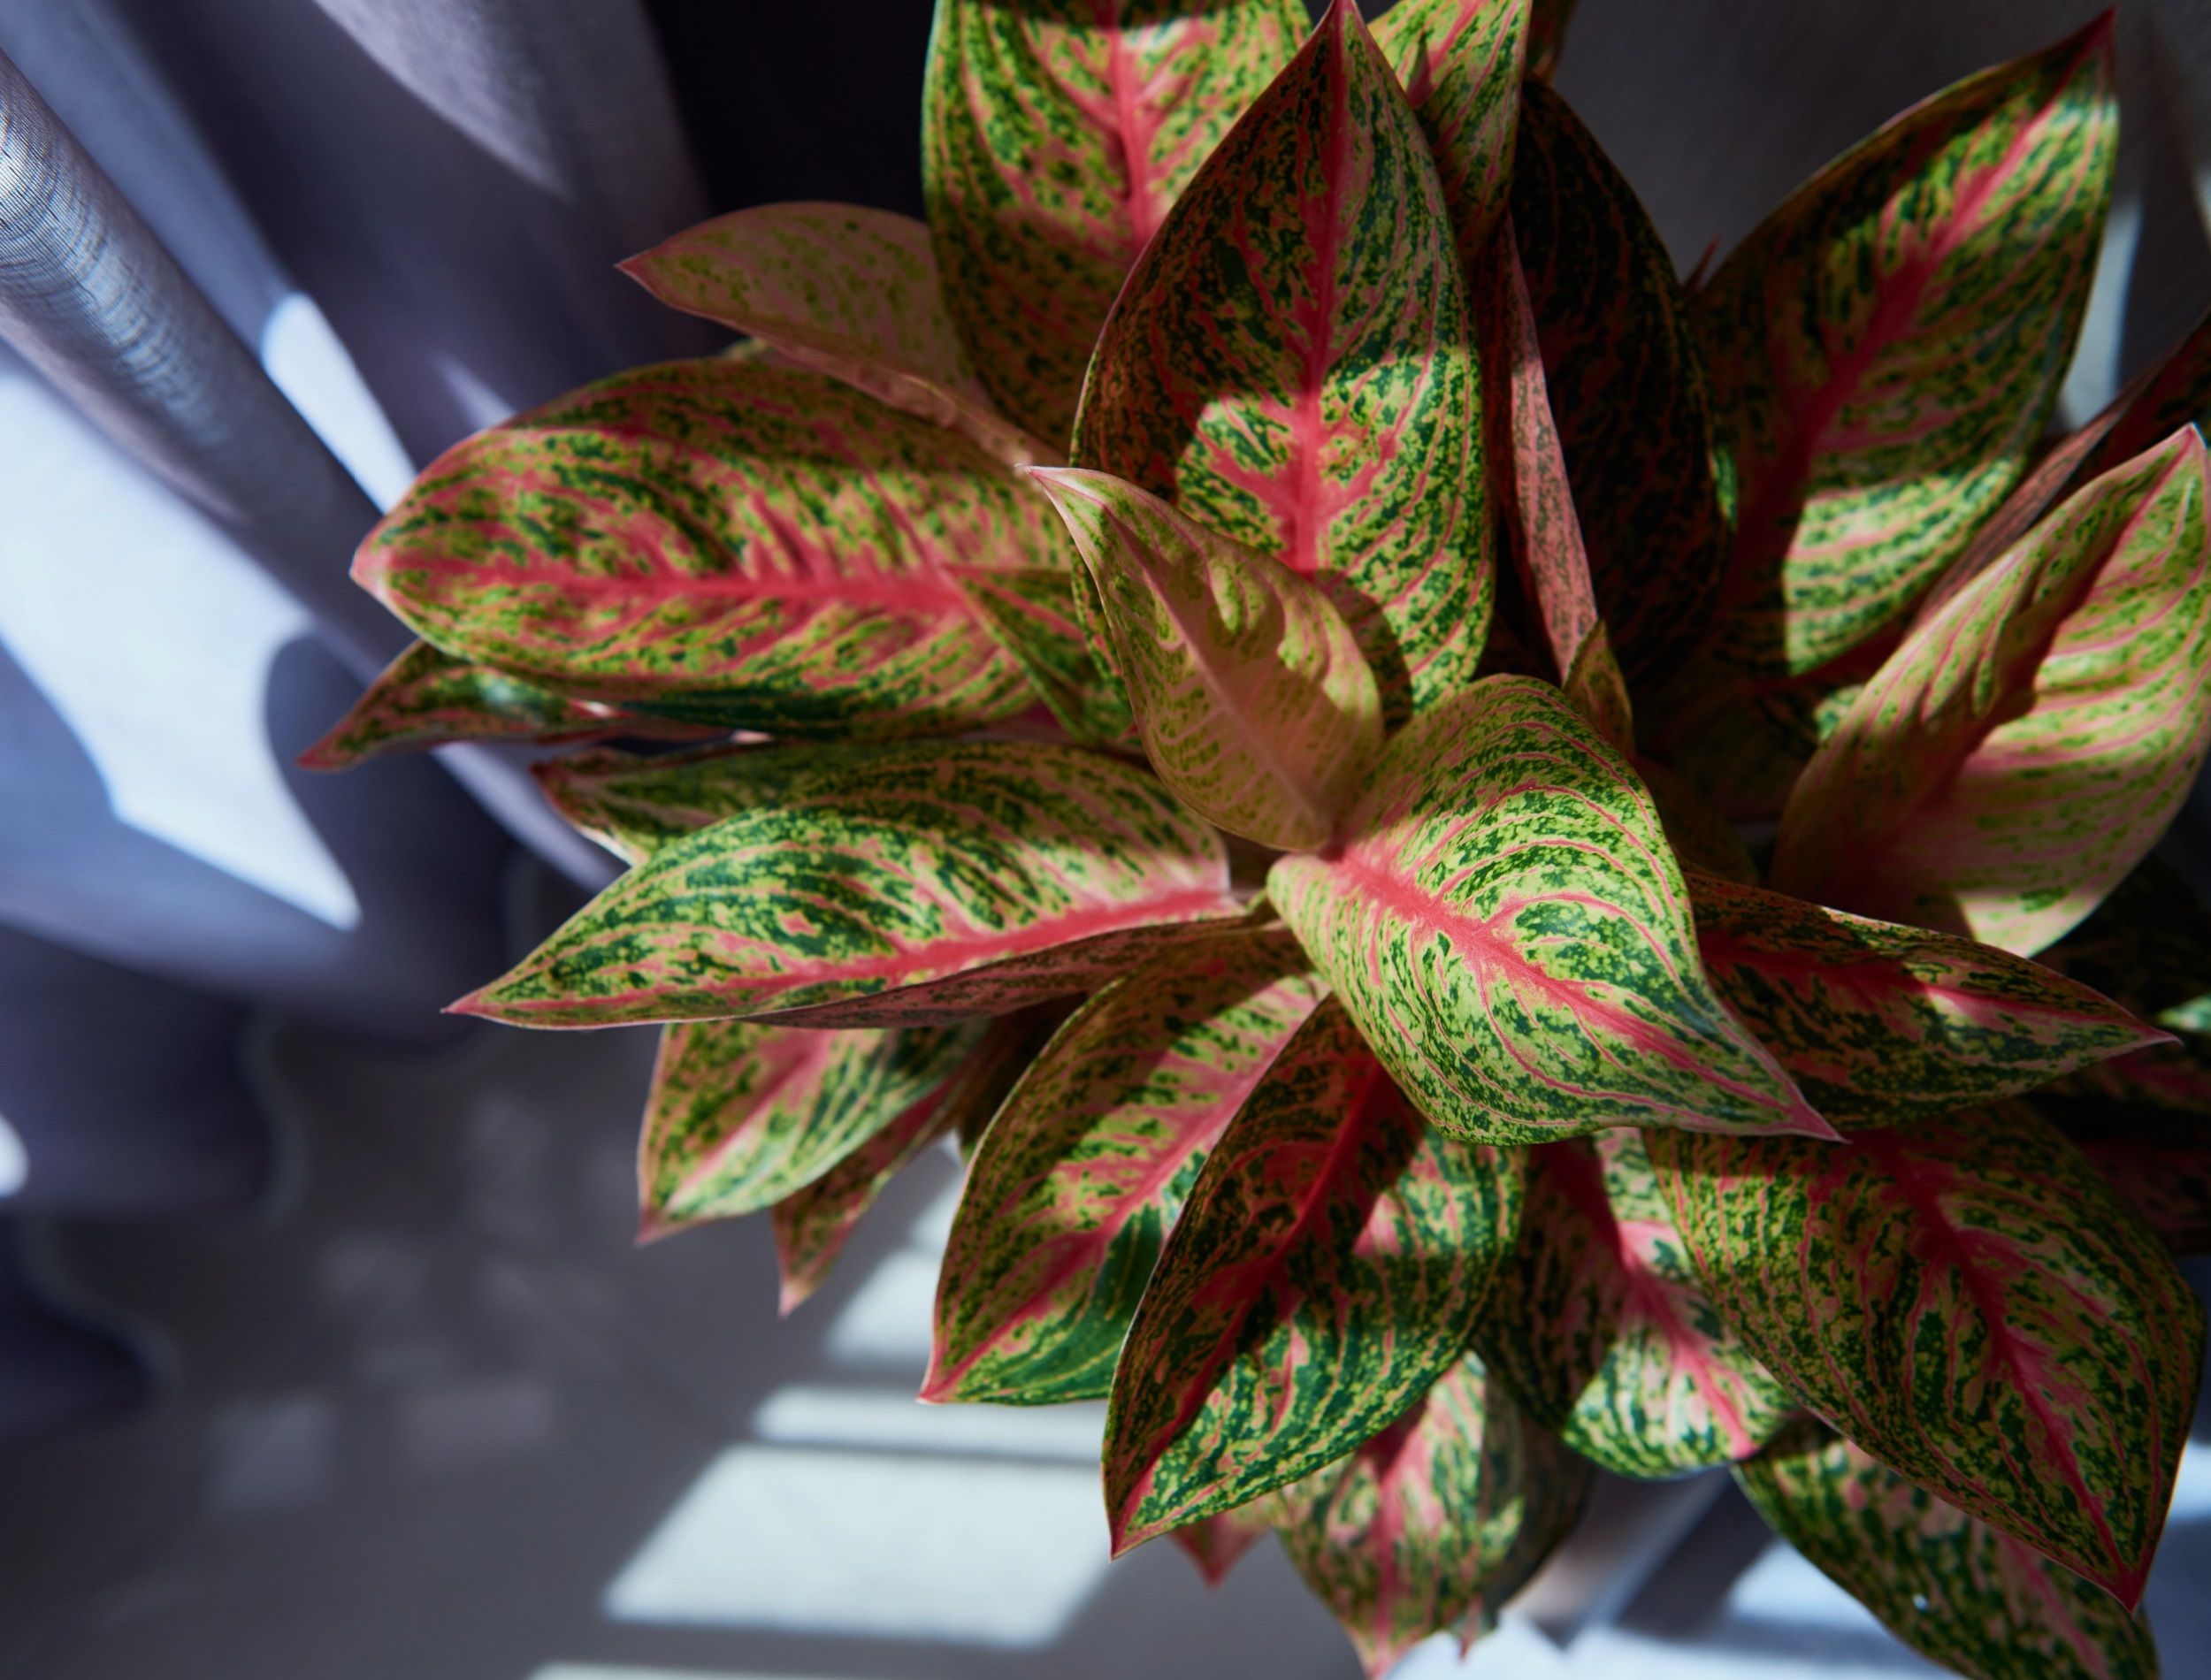 View from above to red aglaonema indoor houseplant with lush pinky leaves in interior.